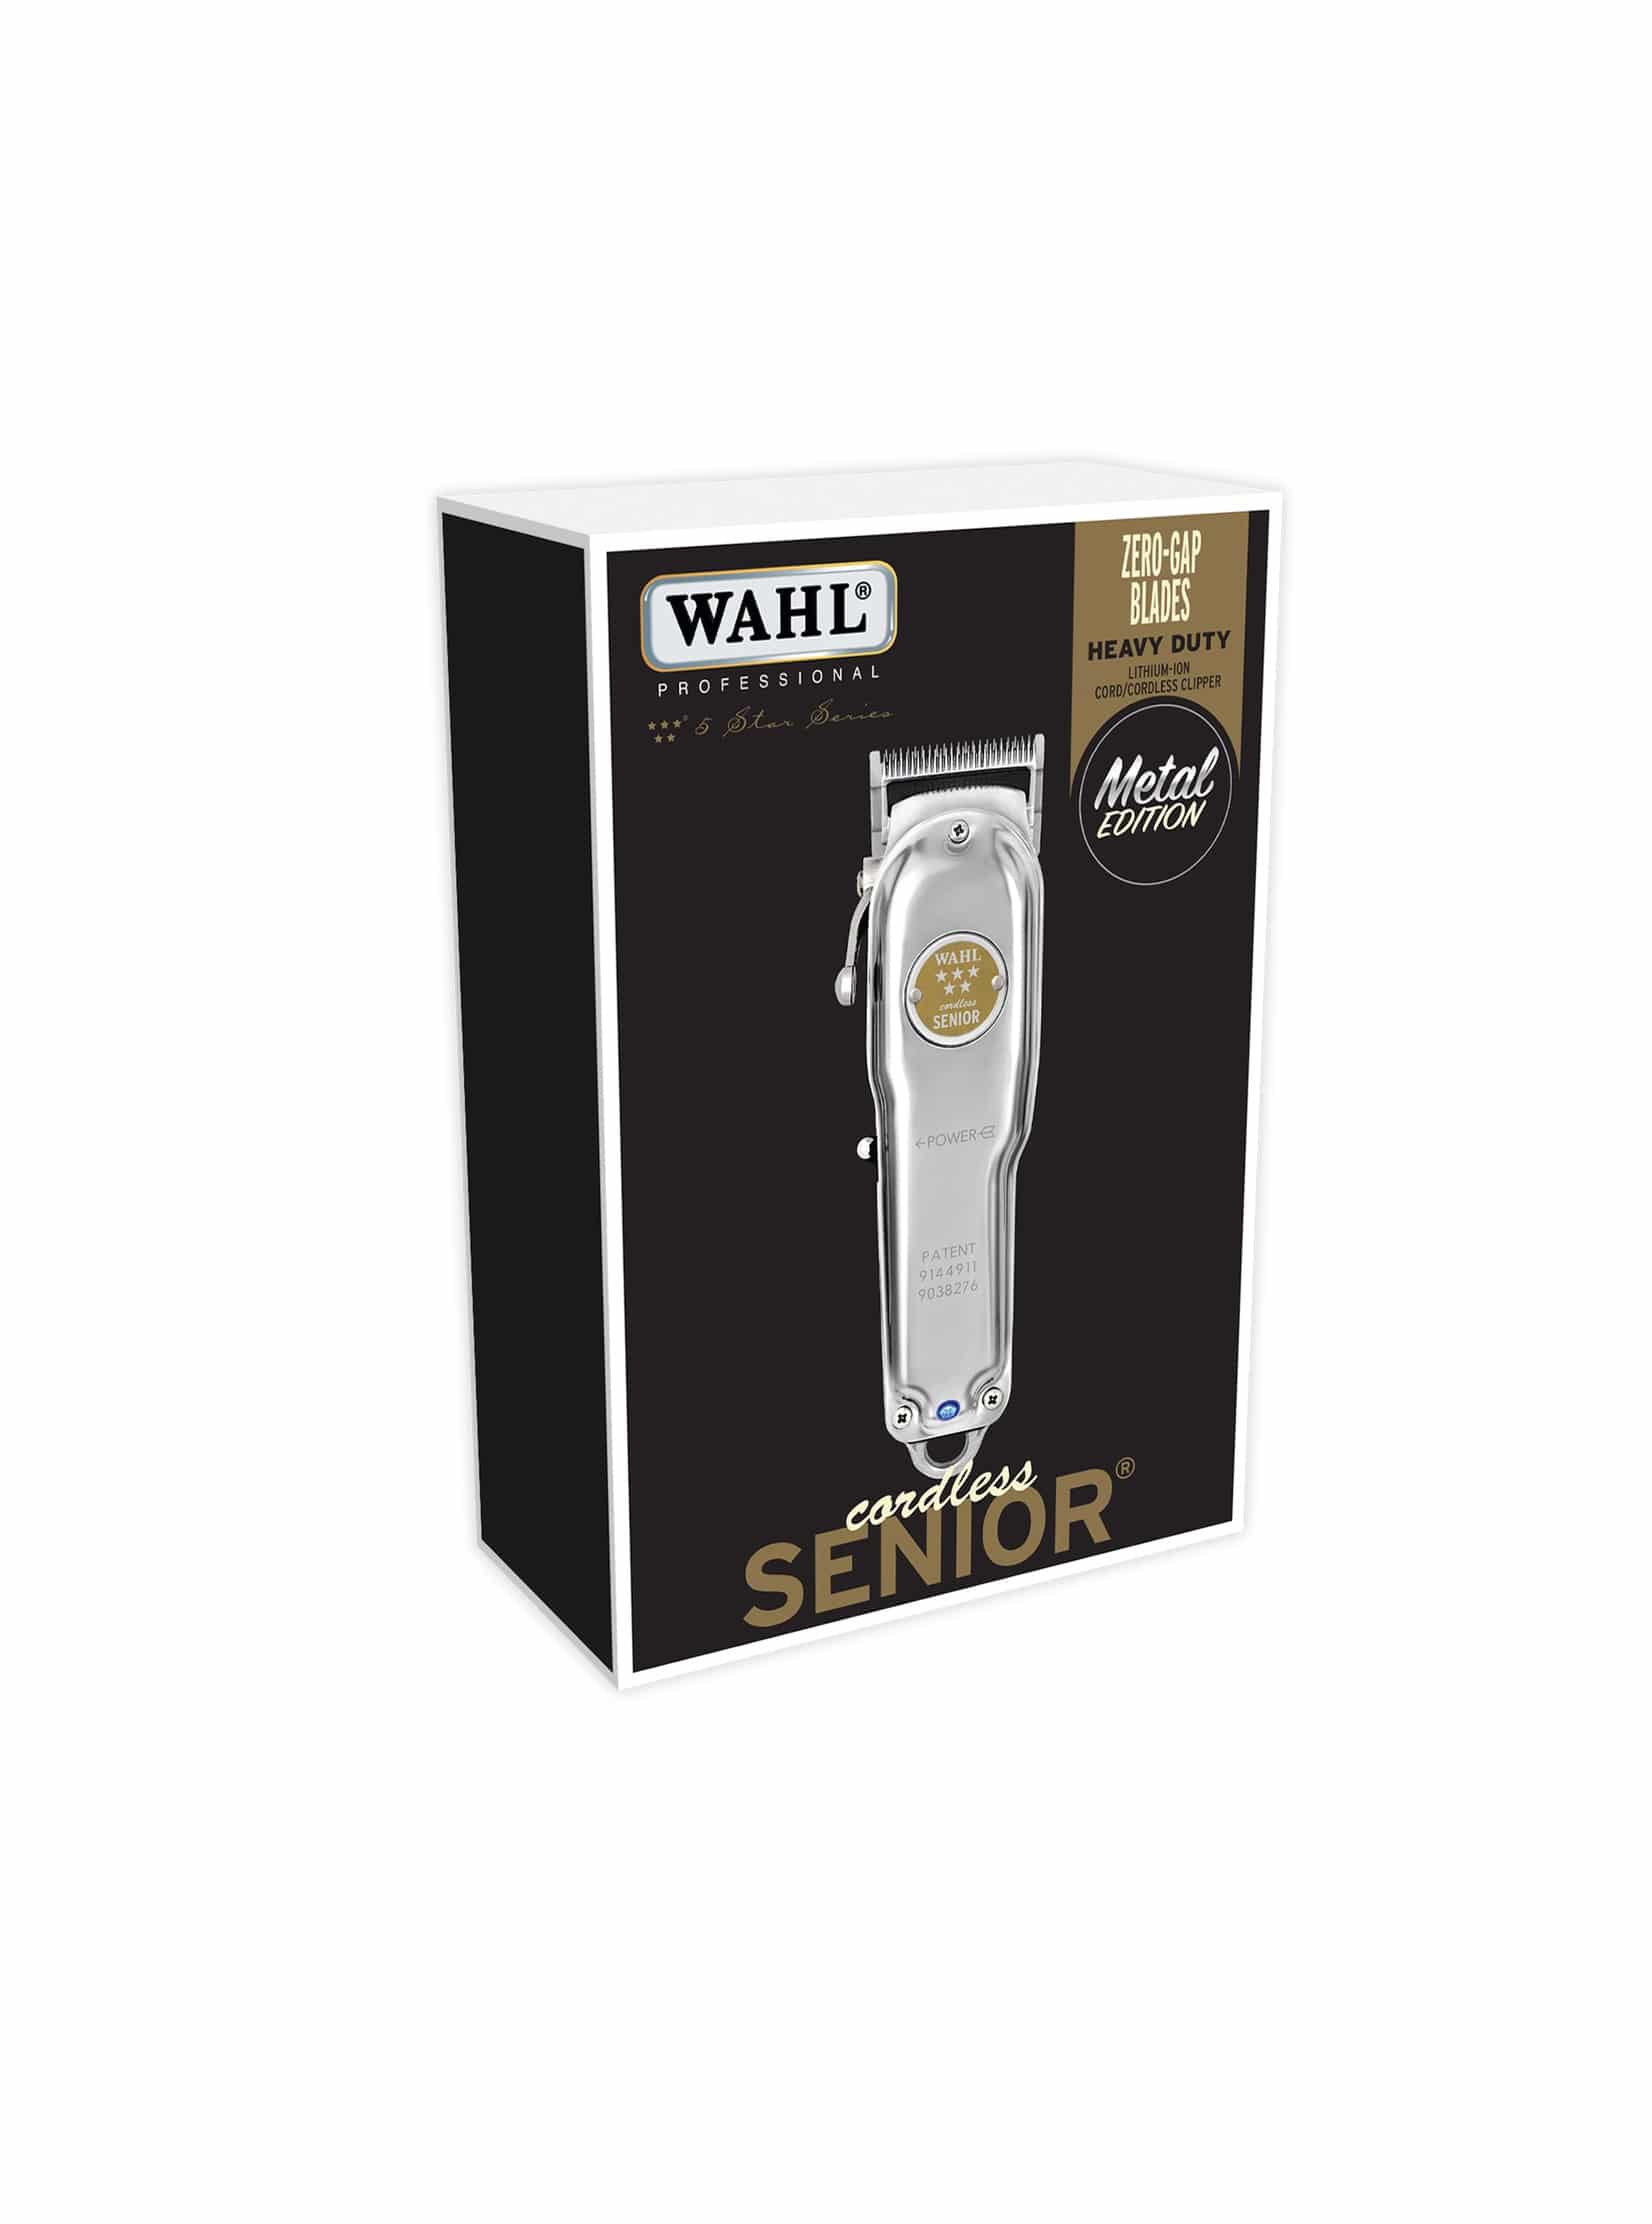 Wahl Professional Senior Metal Clipper - Limited Edition